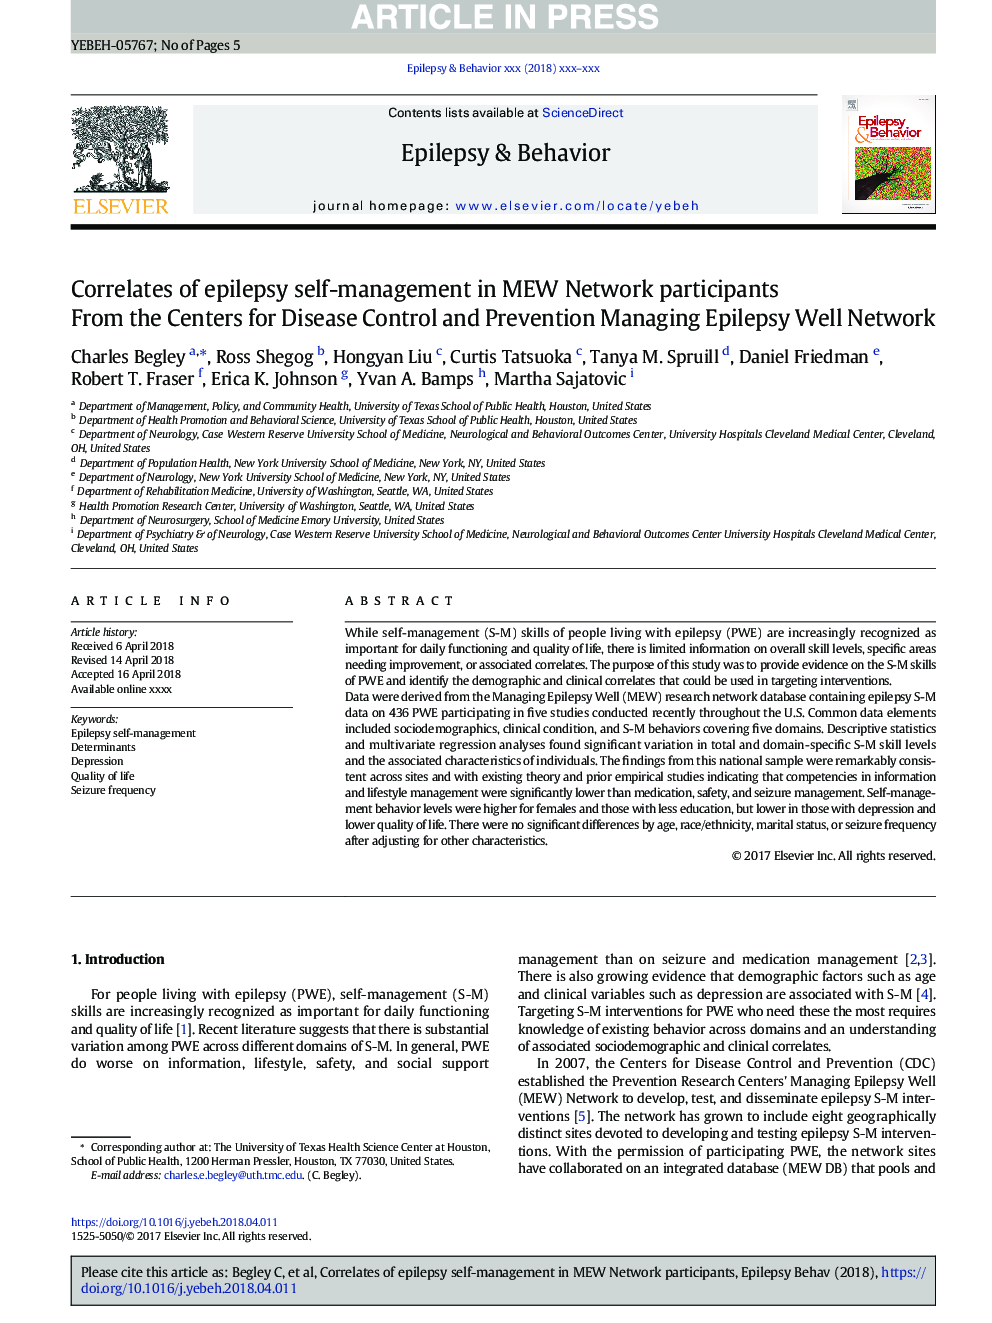 Correlates of epilepsy self-management in MEW Network participants